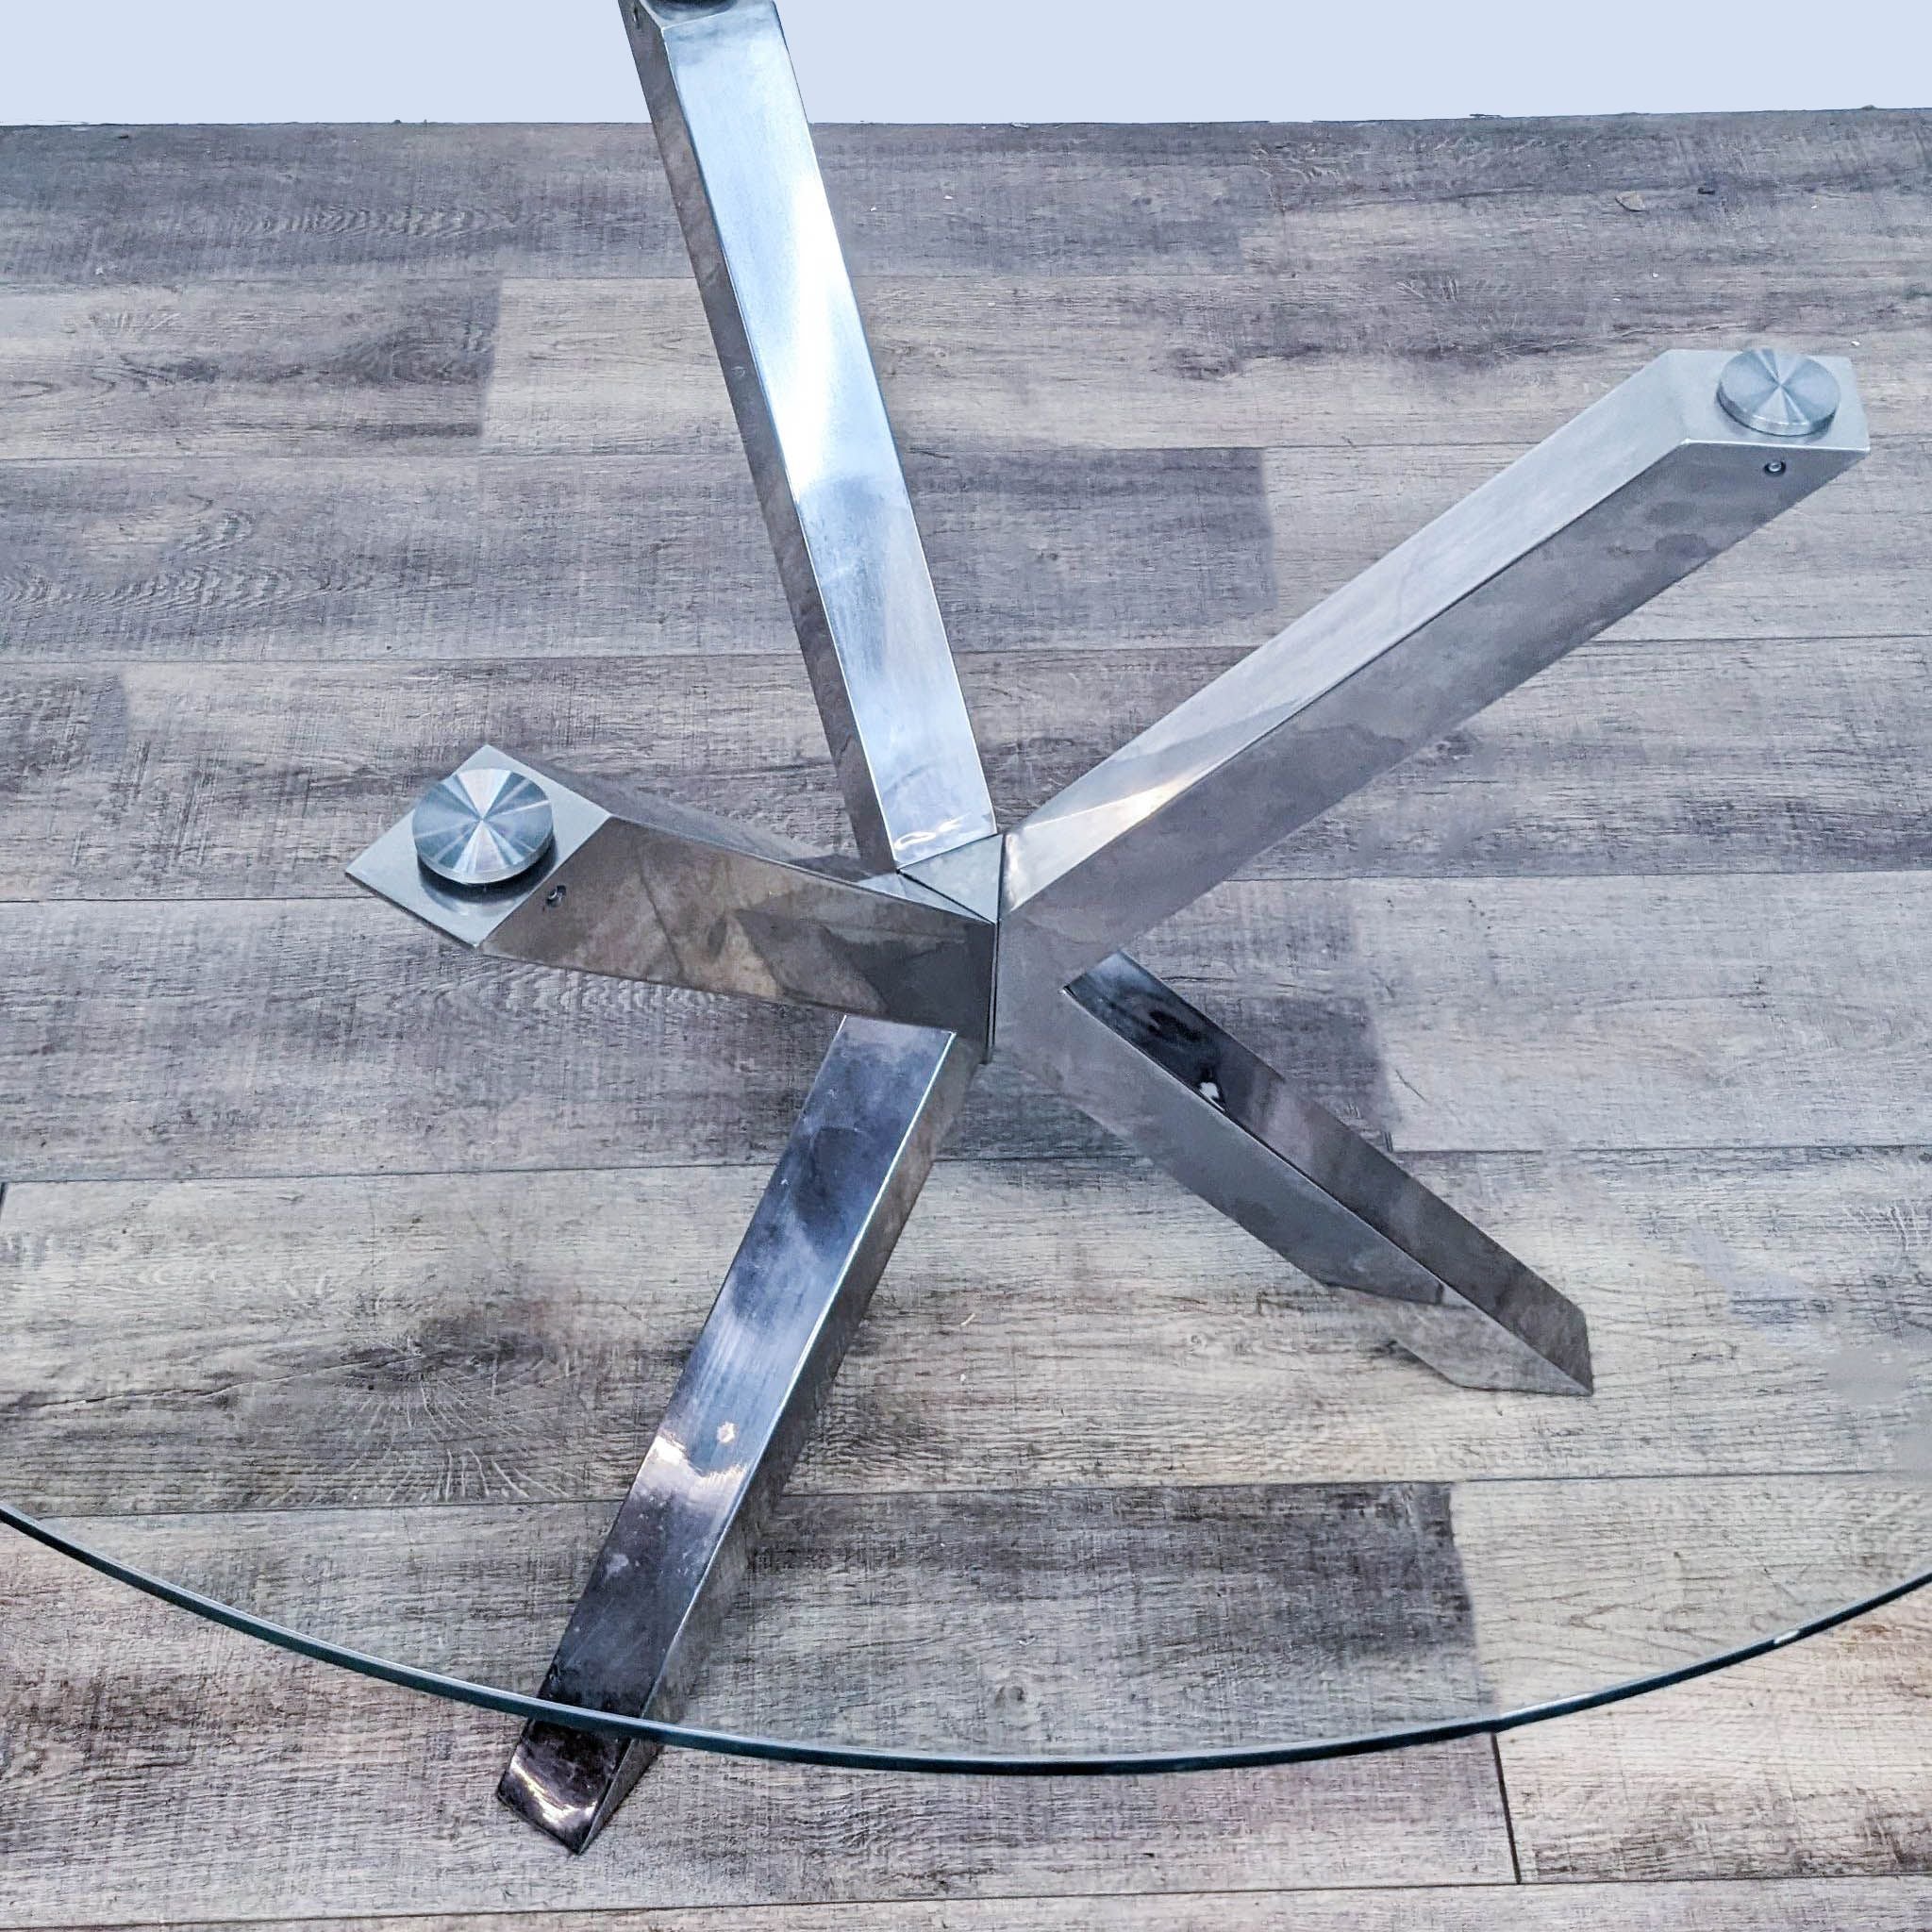 Top-down view of Wayfair's modern dining table showing the clear glass and chrome intersecting base.